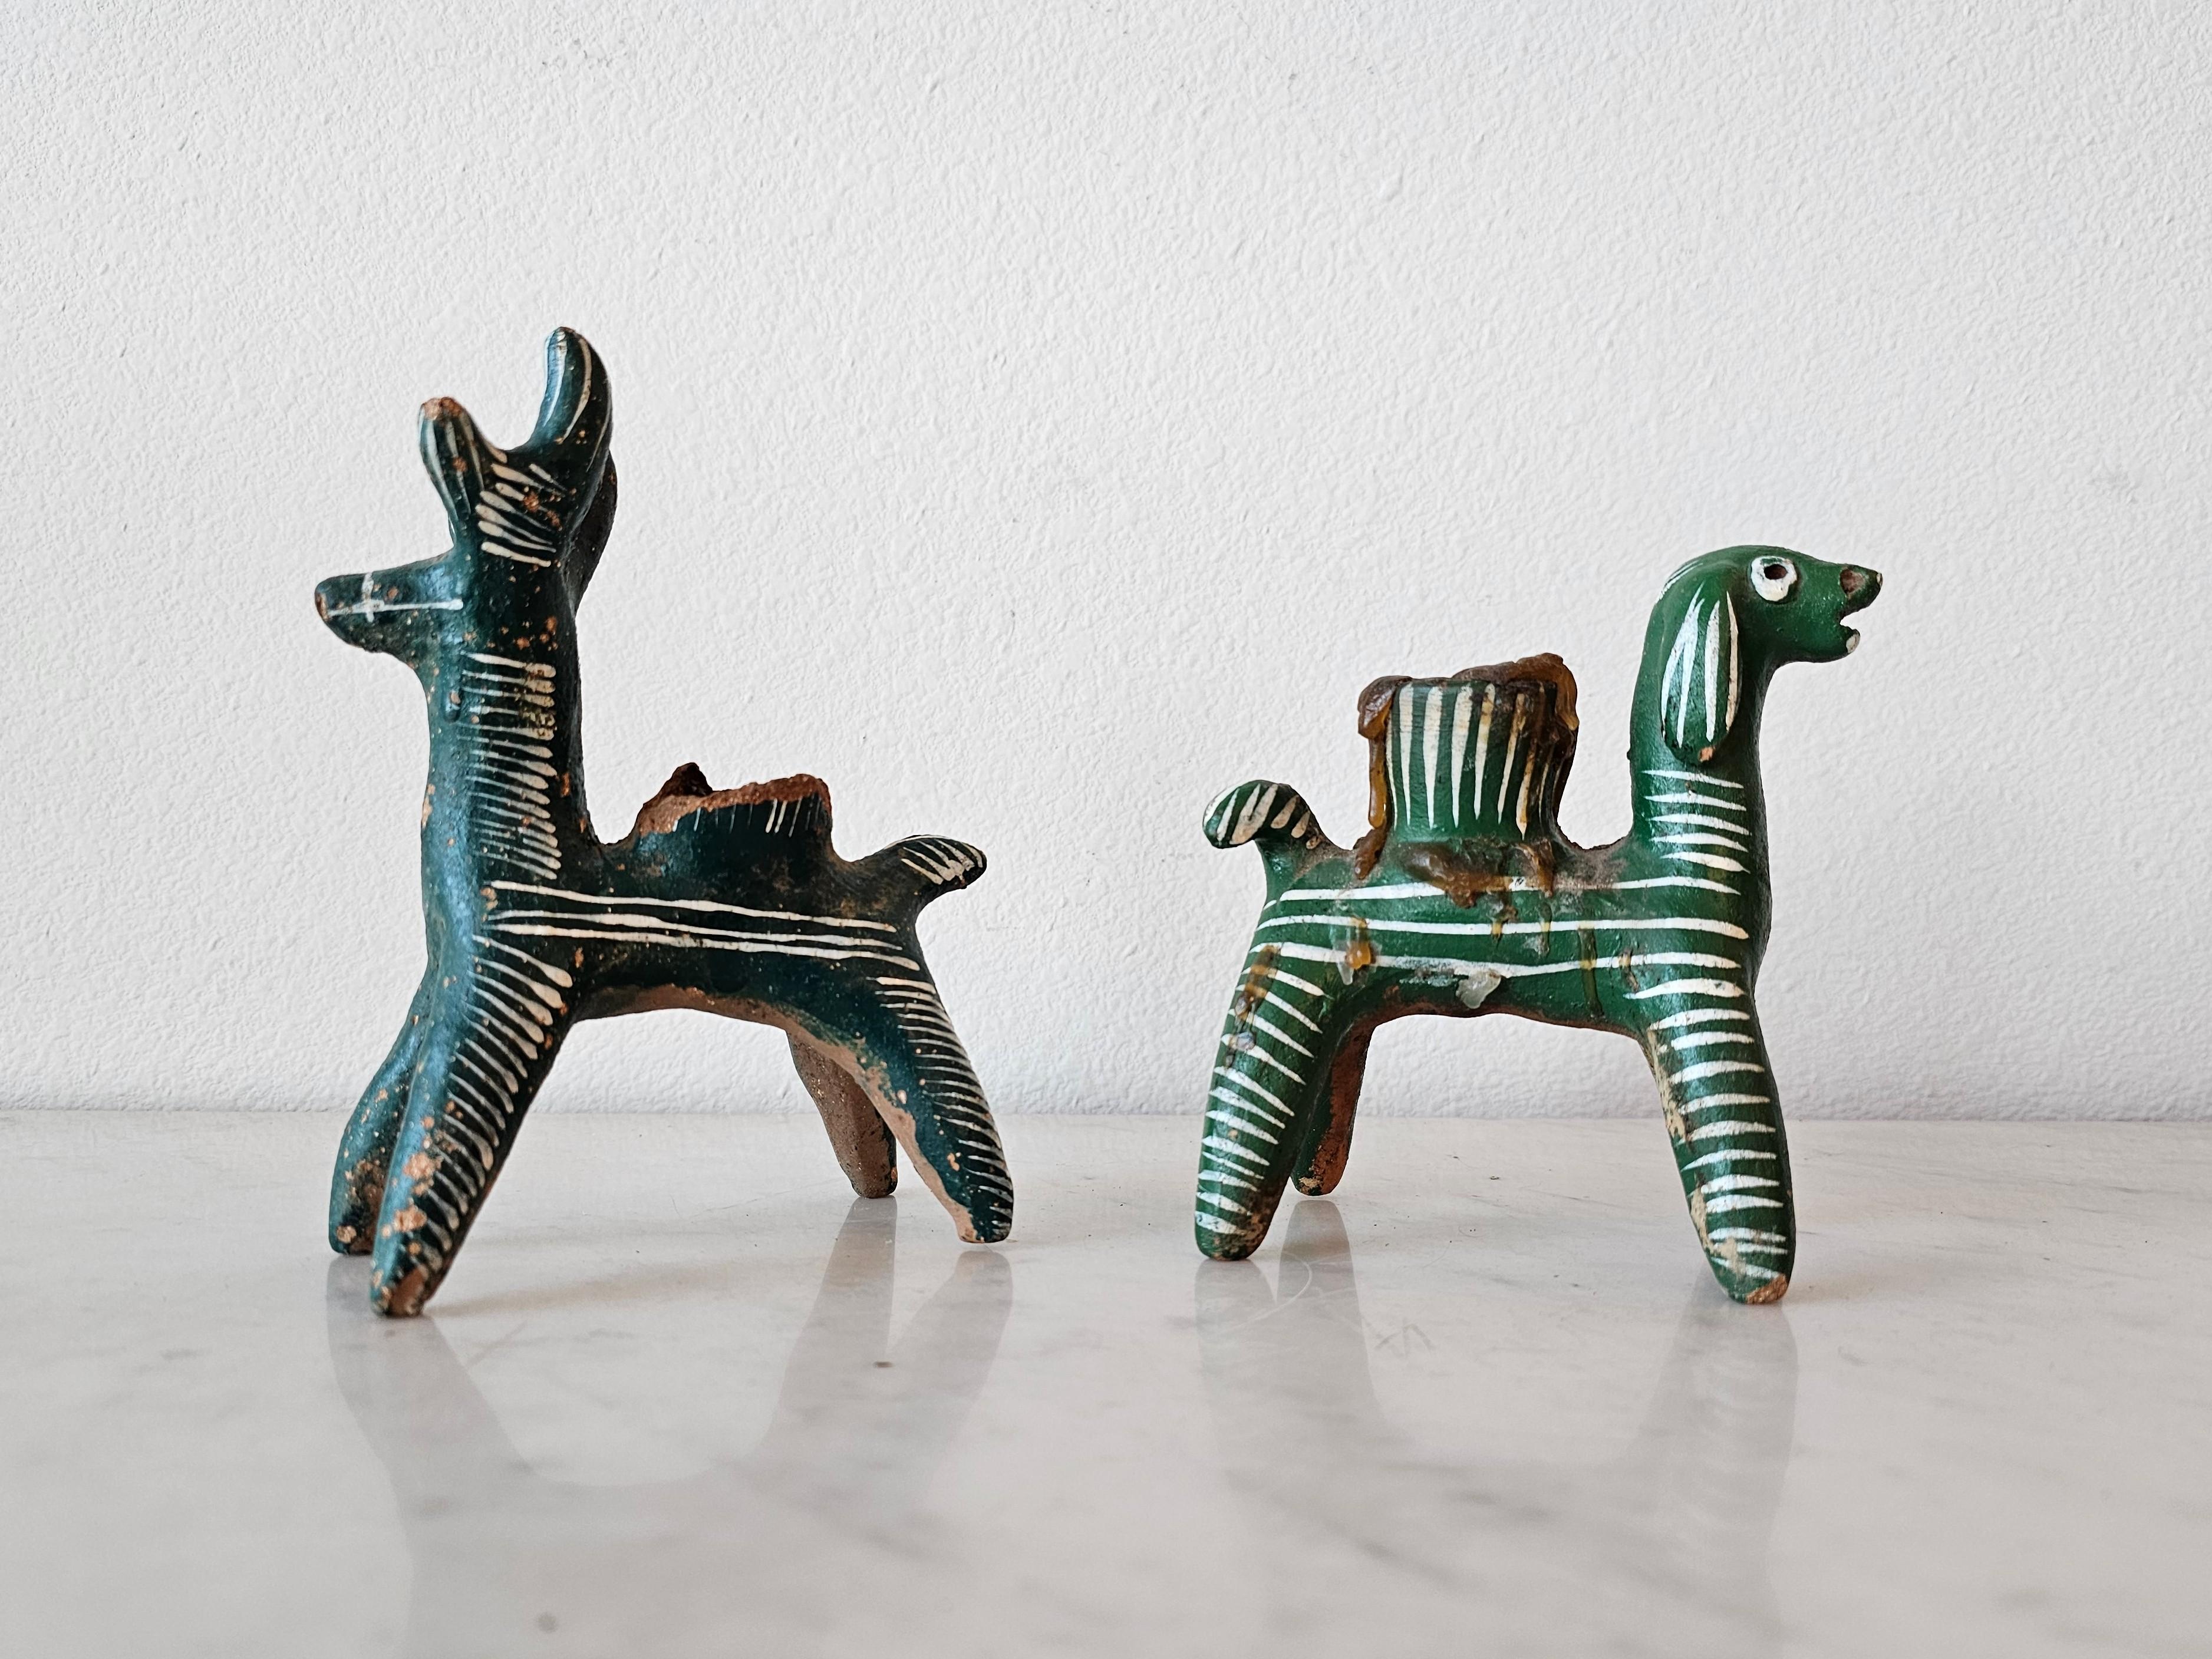 Hand-Crafted Vintage Nahua Pottery Chililico Hidalgo Mexican Folk Art Animal Candleholders For Sale